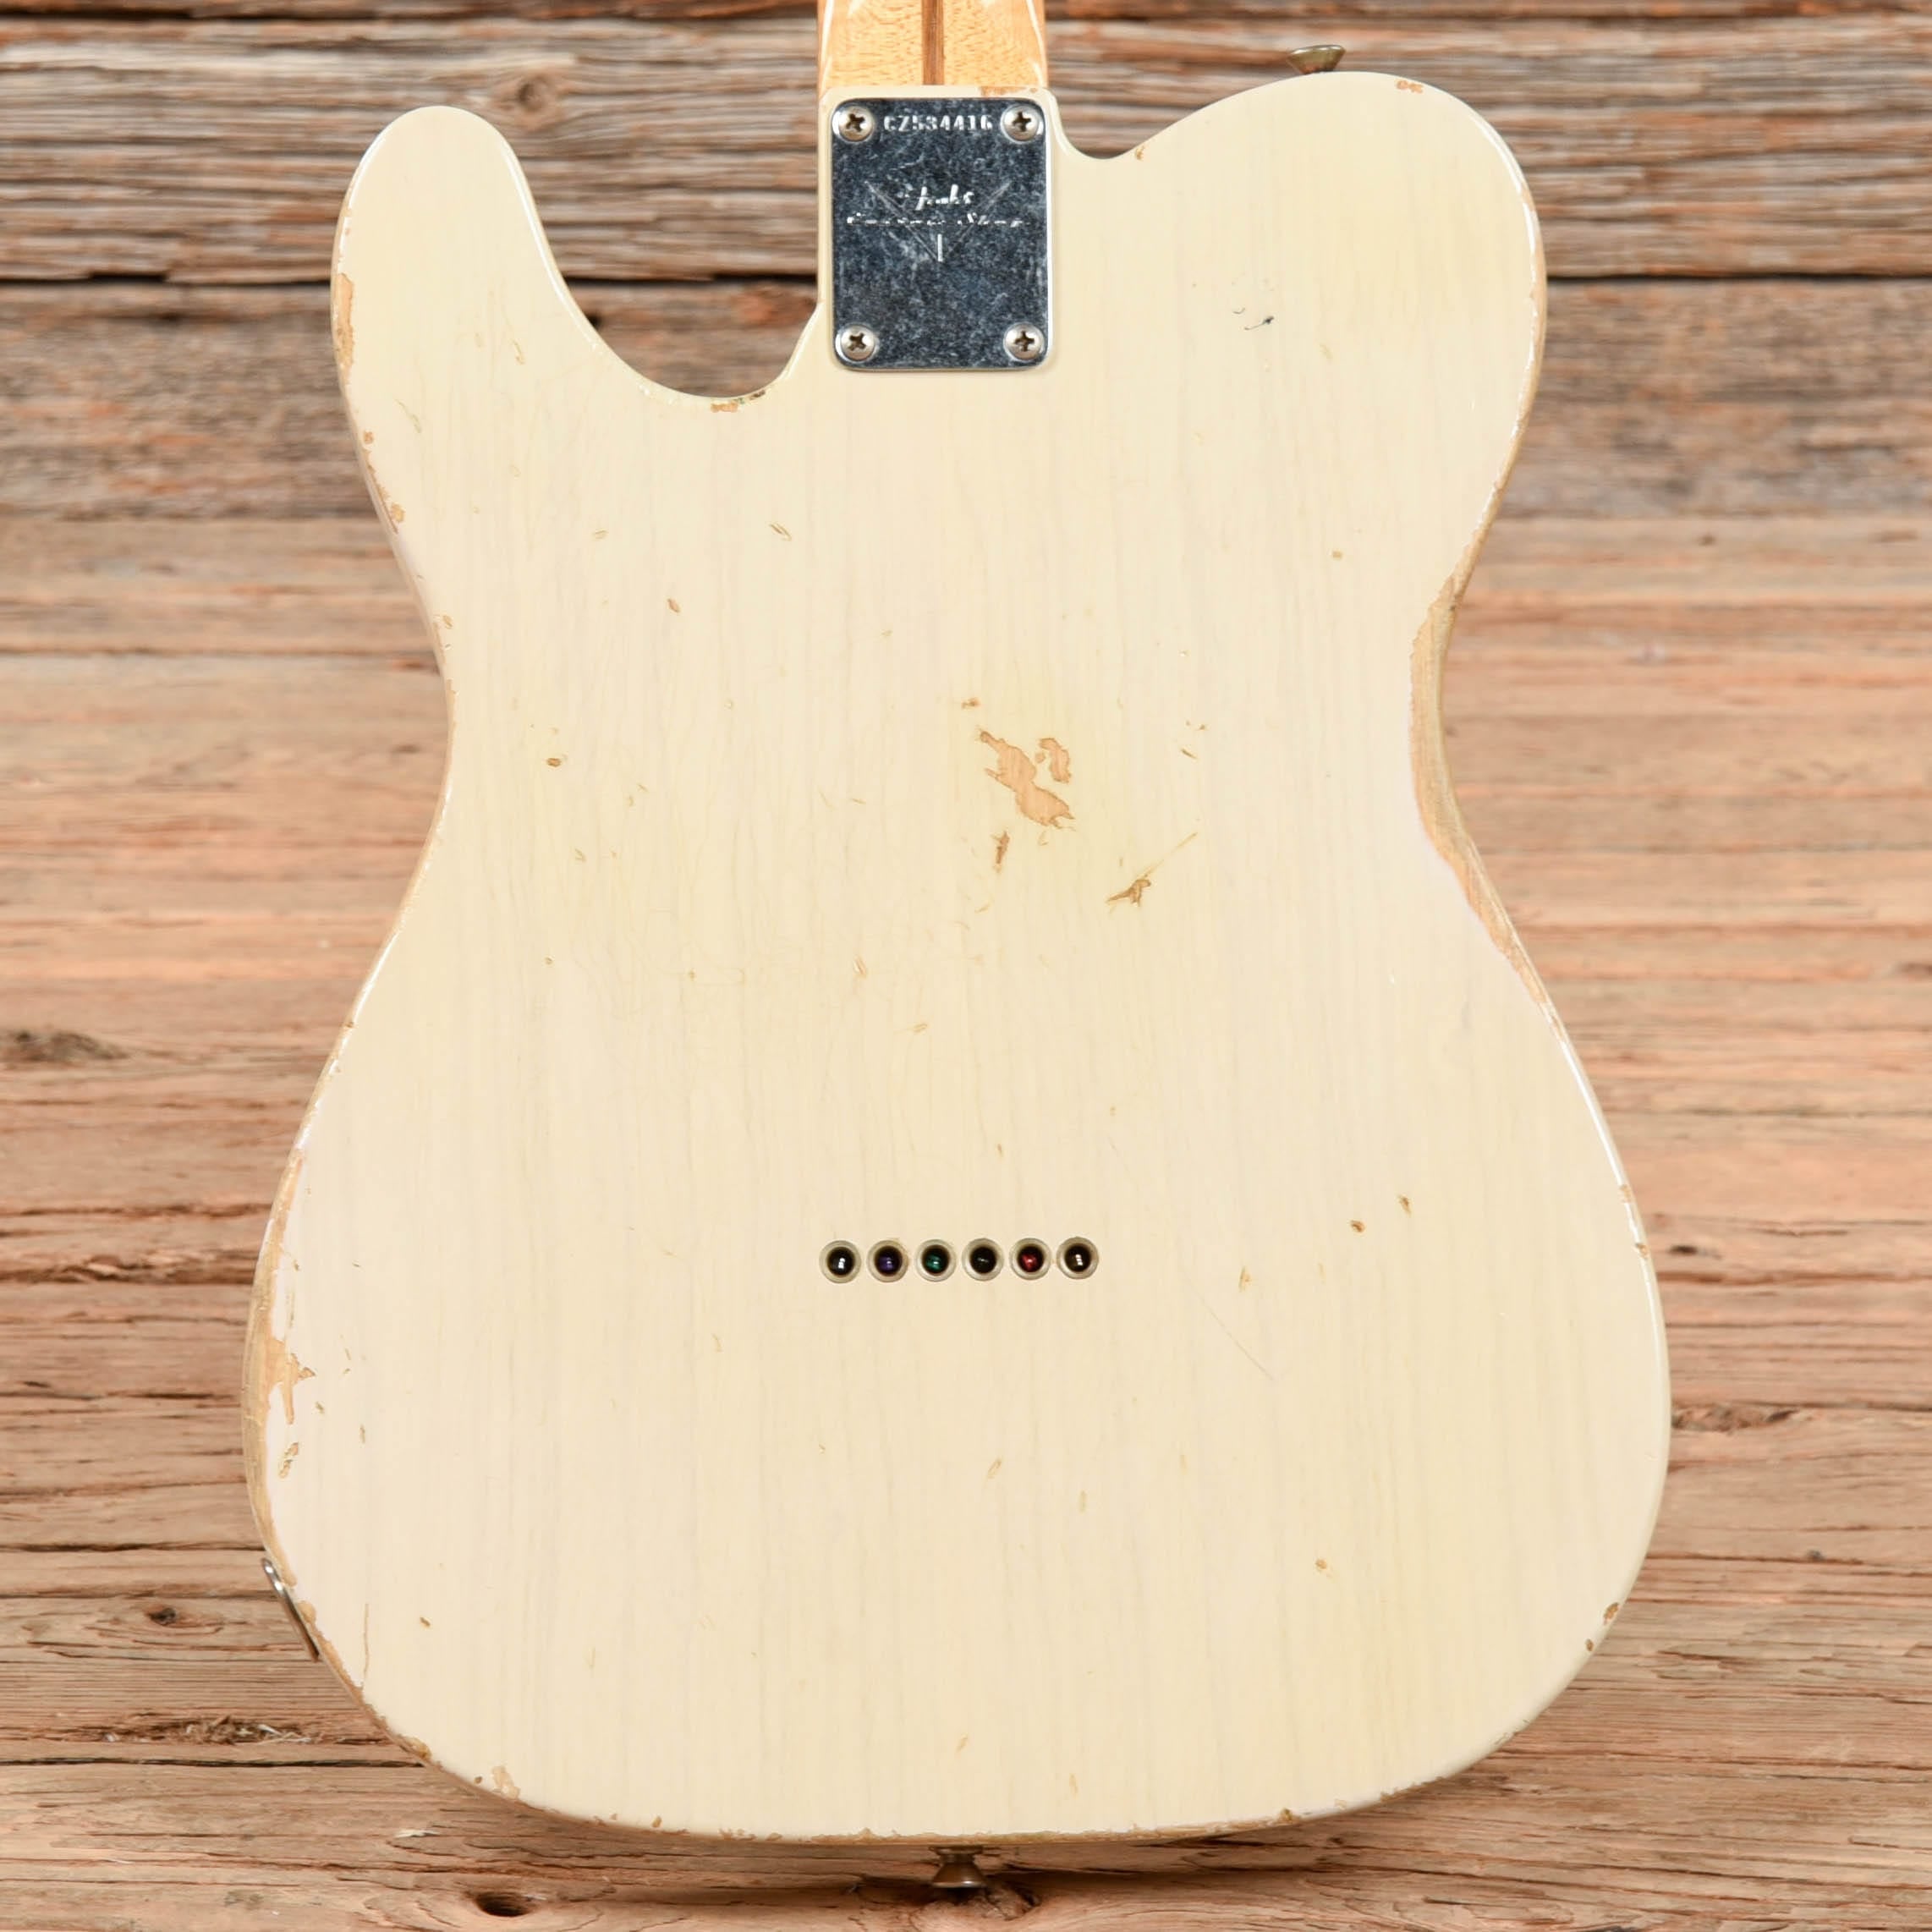 Fender Custom Shop '54 Telecaster Aged White Blonde 2018 Electric Guitars / Solid Body